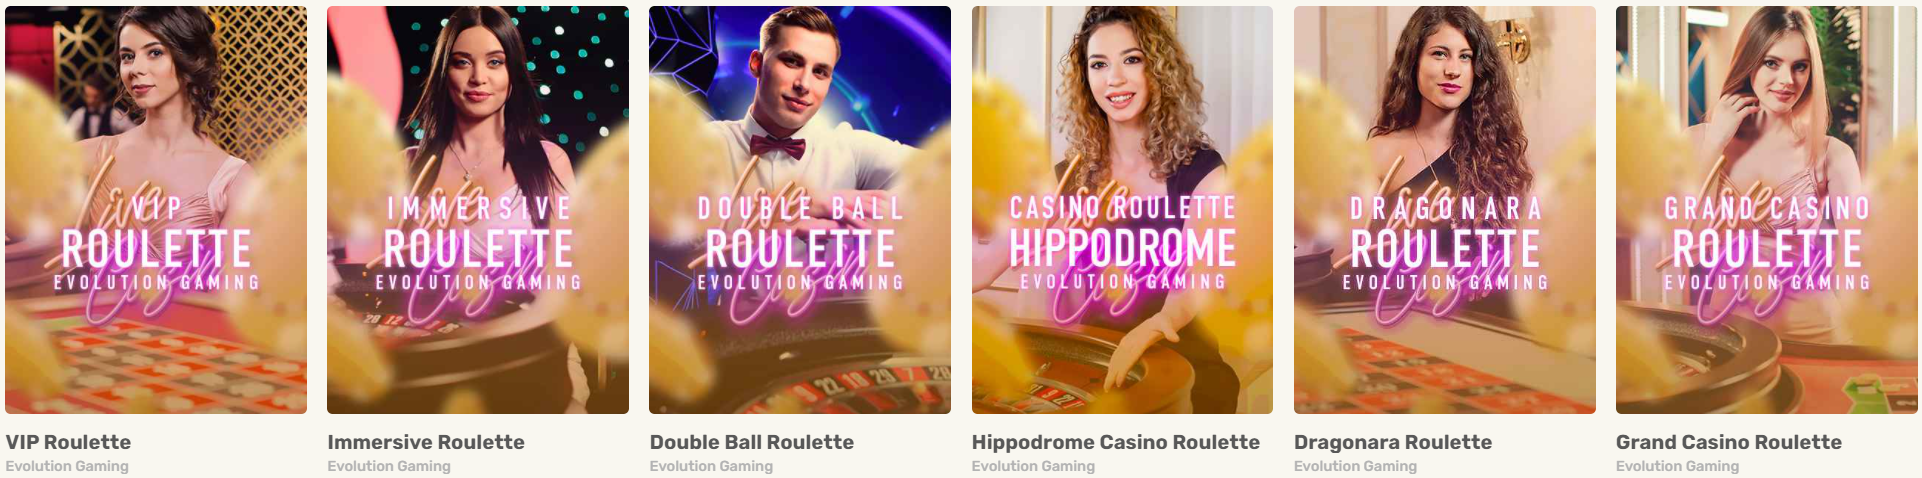 Justspin Live Roulette